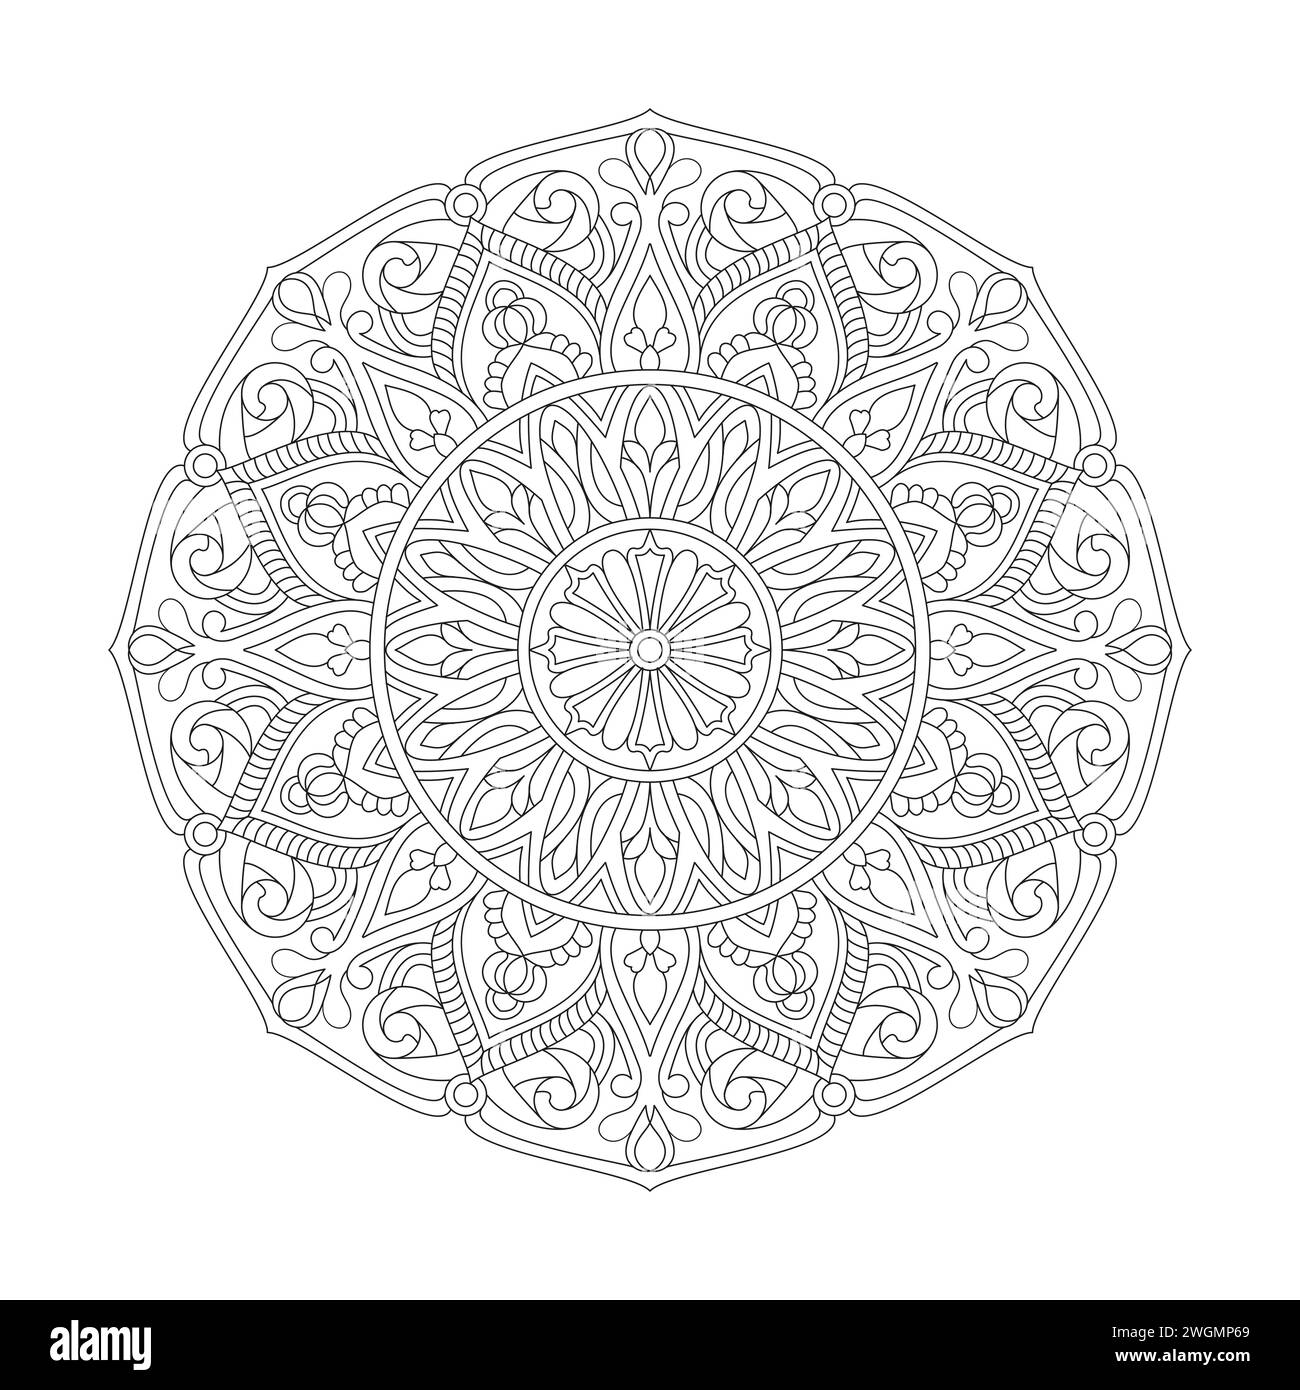 Attractive Whirlwind Mandala Coloring Book Page for kdp Book Interior. Peaceful Petals, Ability to Relax, Brain Experiences, Harmonious Haven, Peacefu Stock Vector